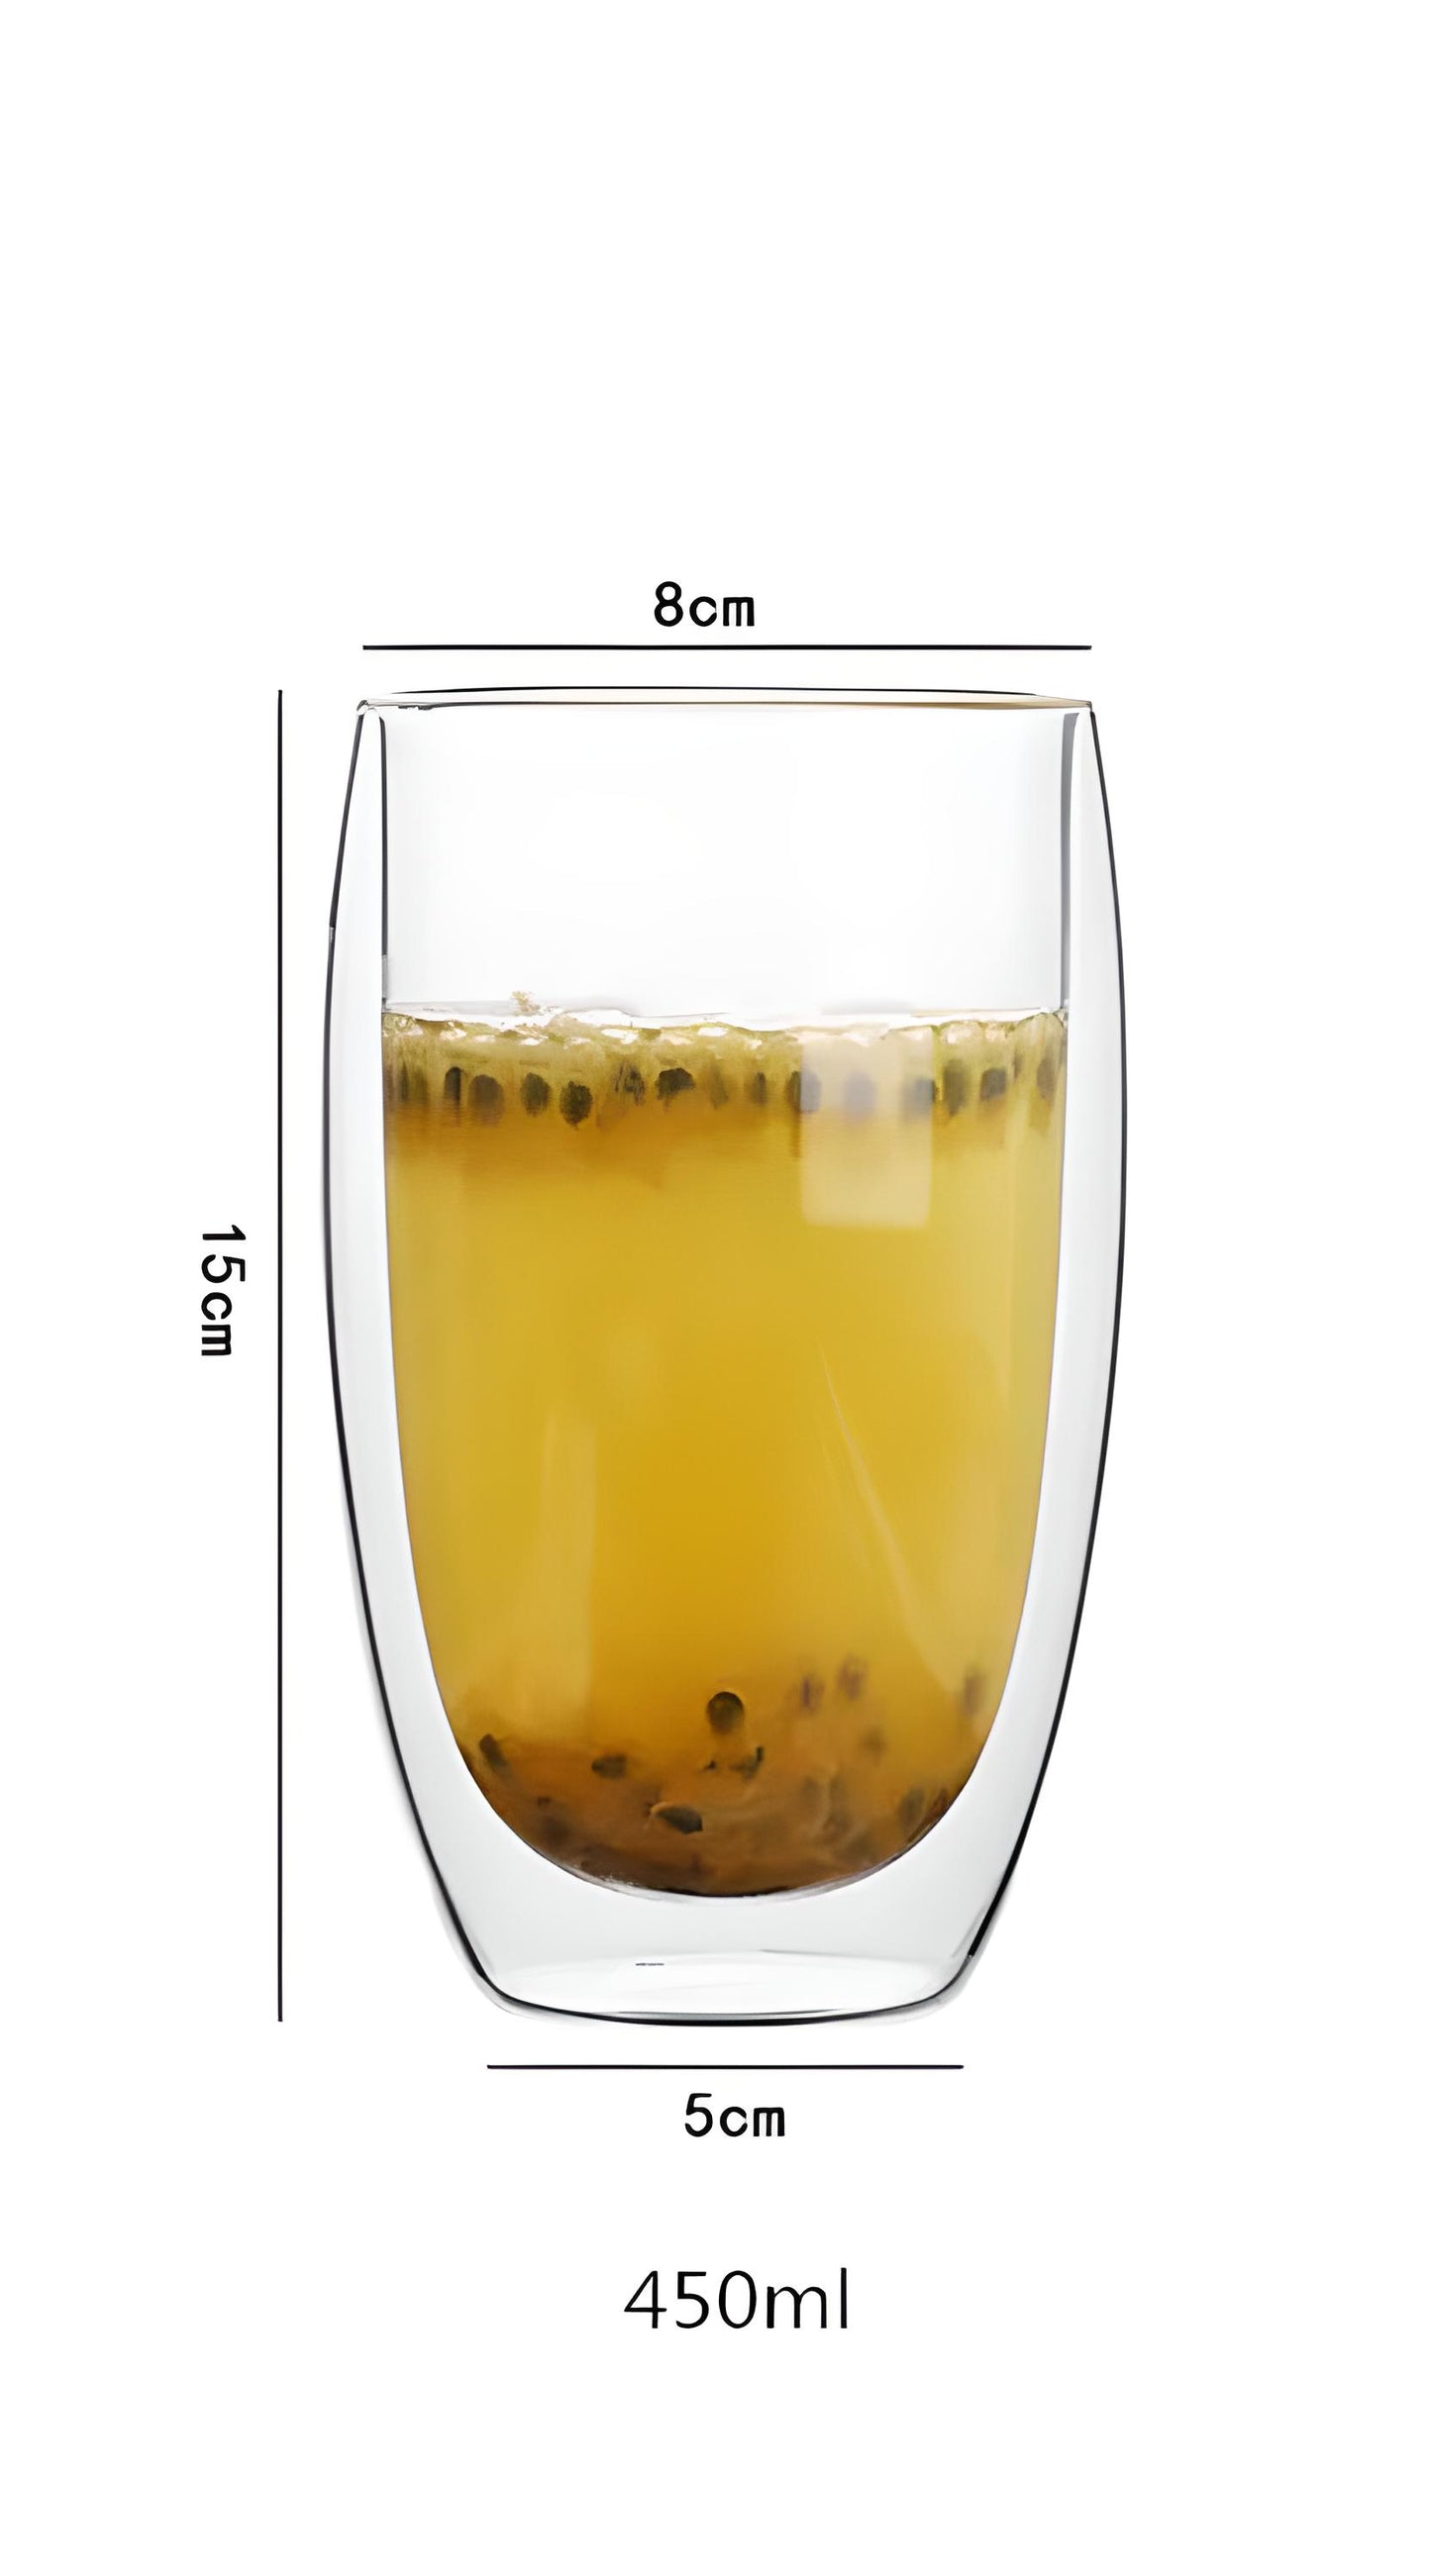 A single 450ml double walled glass showing the dimensions